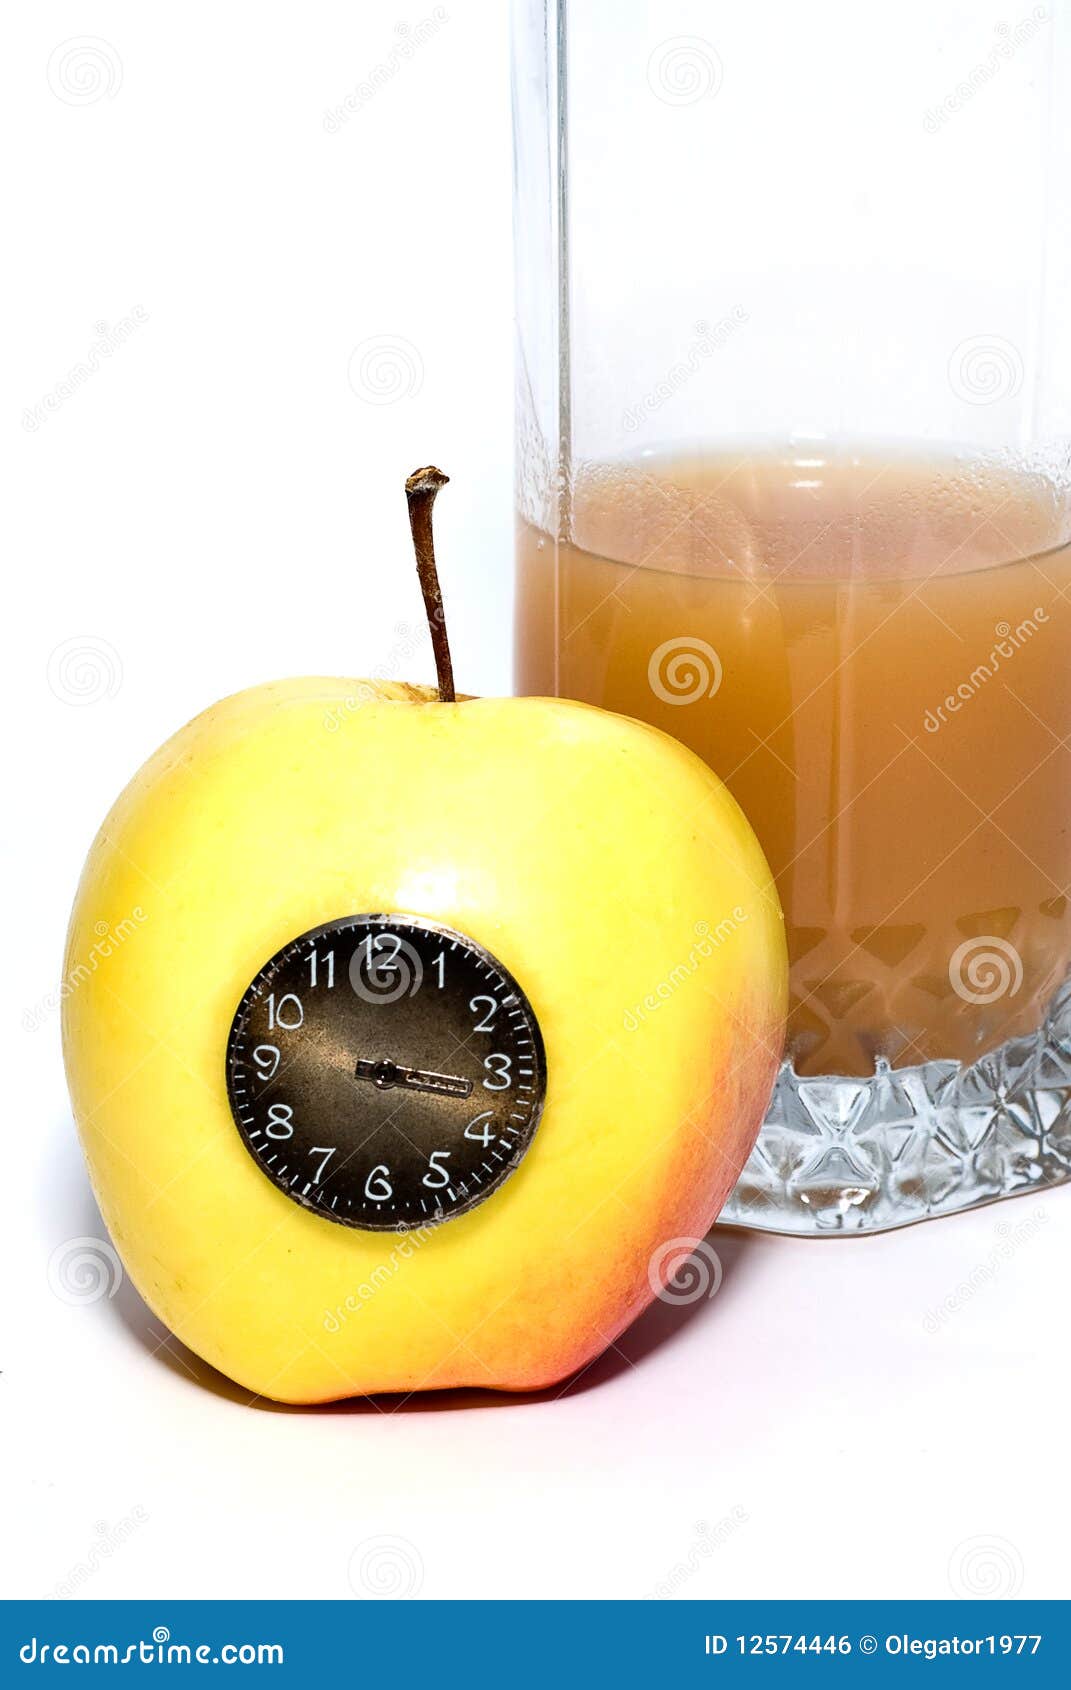 Time of apple diet. Glass of juice behind the yellow apple with the clock